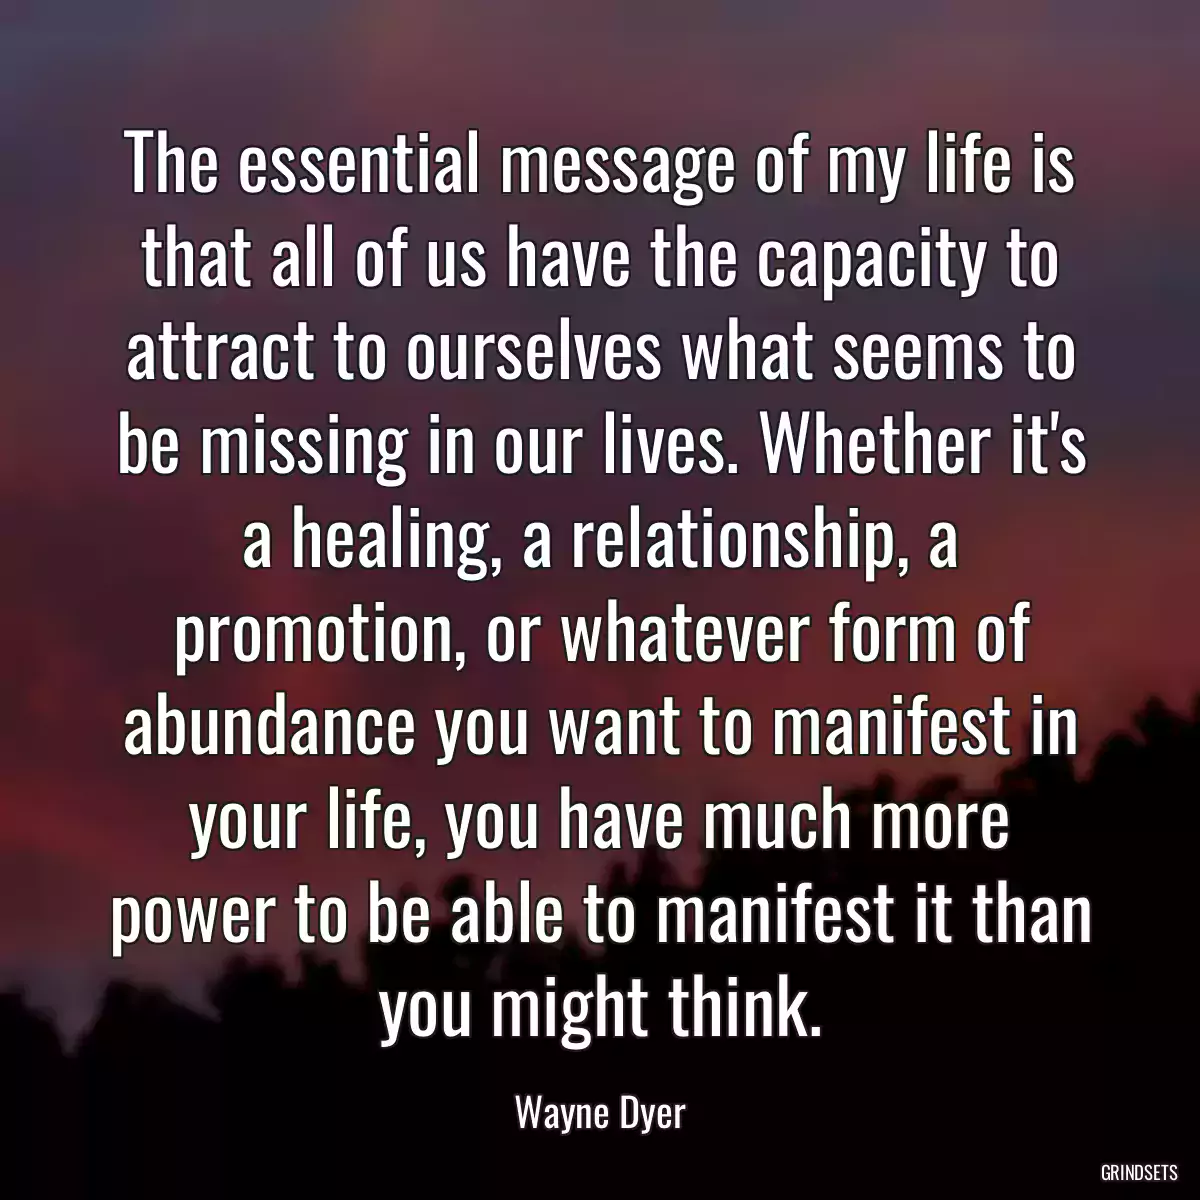 The essential message of my life is that all of us have the capacity to attract to ourselves what seems to be missing in our lives. Whether it\'s a healing, a relationship, a promotion, or whatever form of abundance you want to manifest in your life, you have much more power to be able to manifest it than you might think.